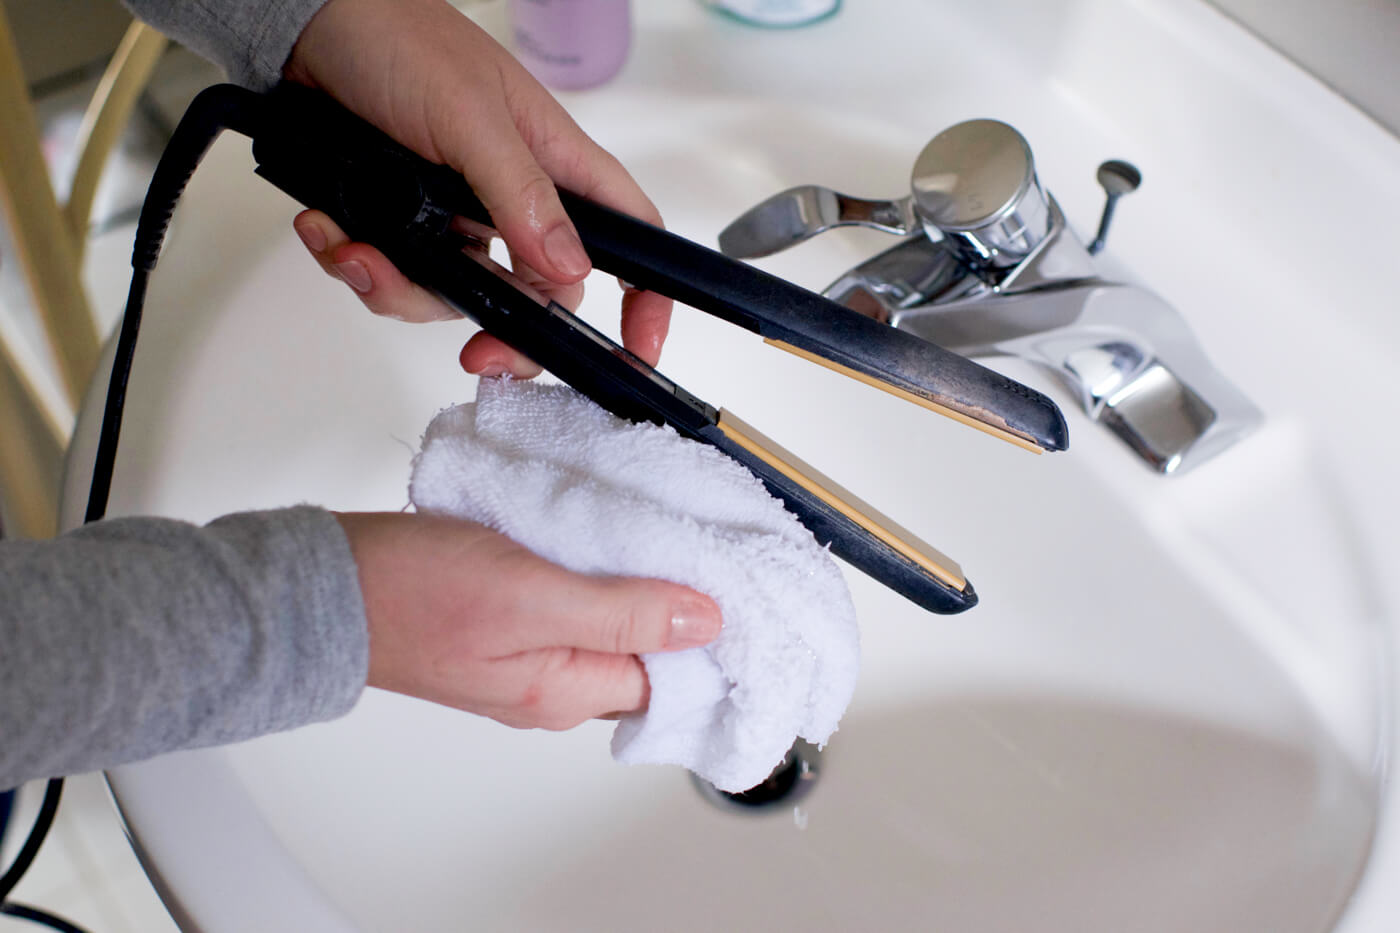 How to Clean Flat Iron with Vinegar